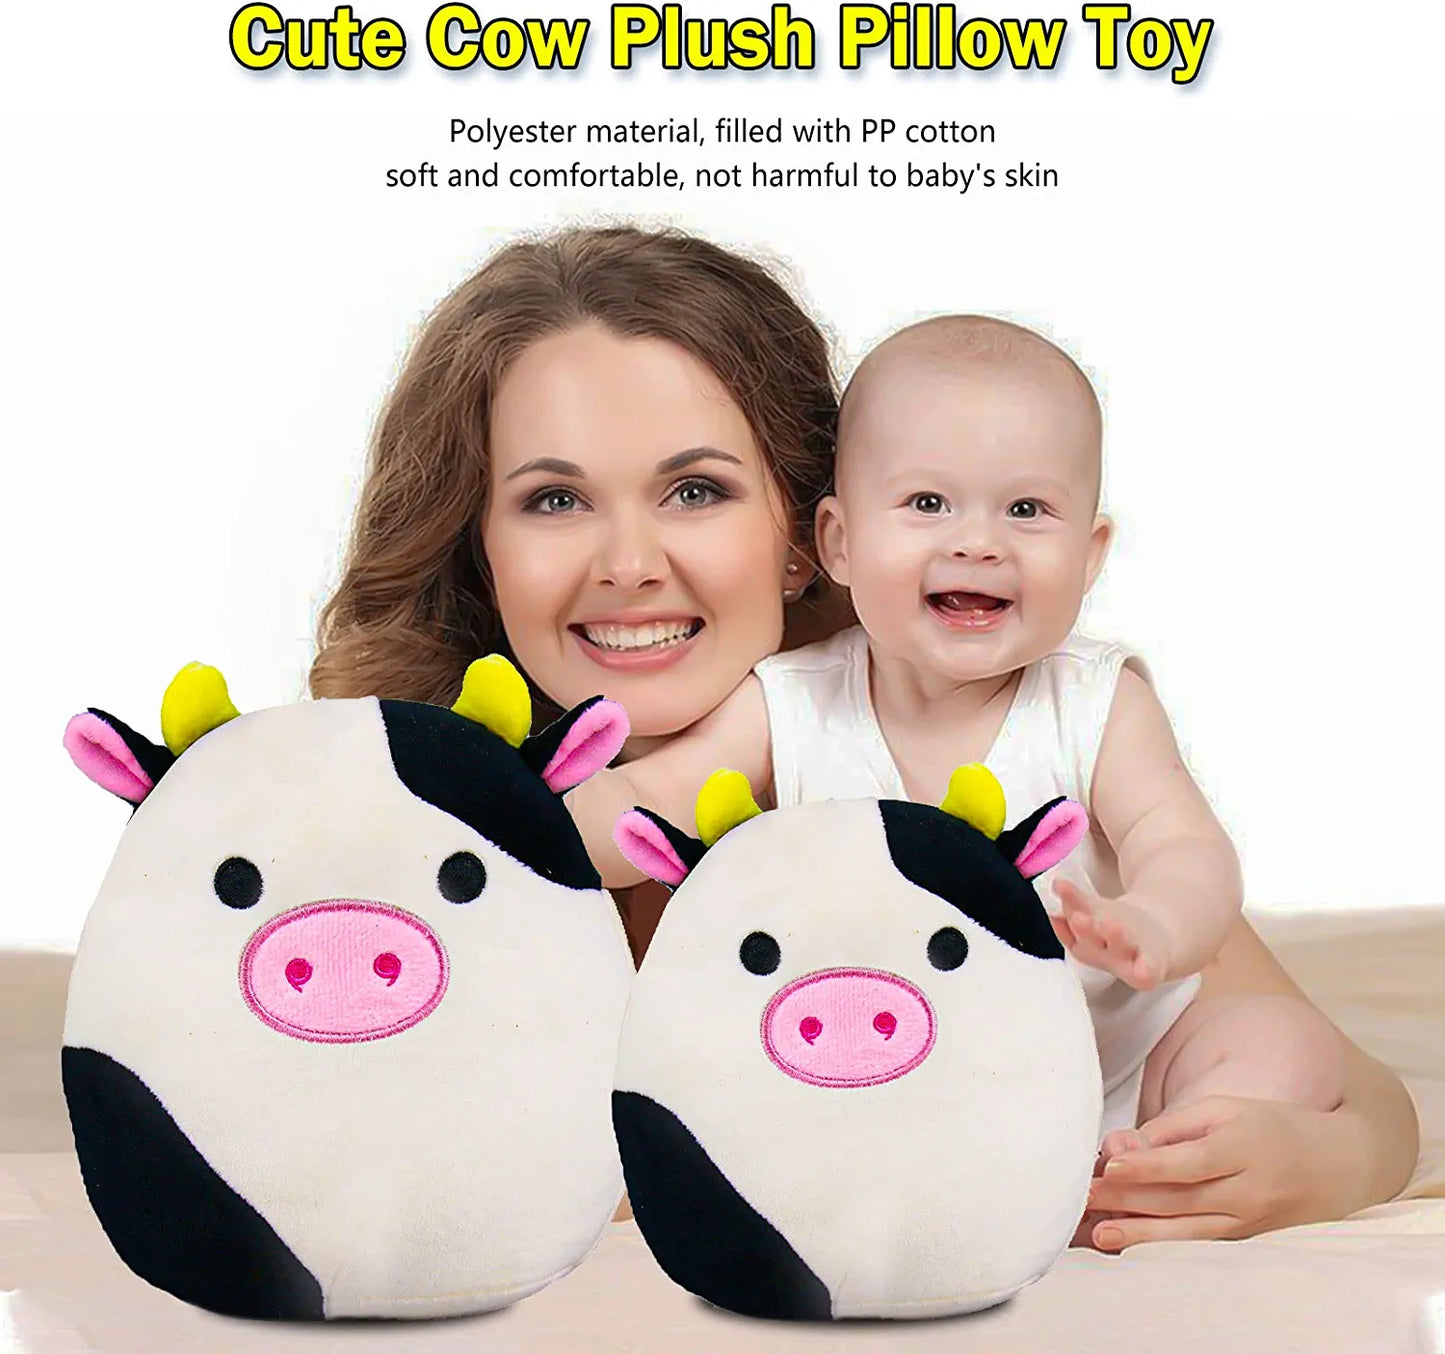 8 Inch Cow Plush Pillow,Cute Soft Cow Stuffed Animals Plushie Toy,Great Gift for Kids Girlfriend Christmas Birthday